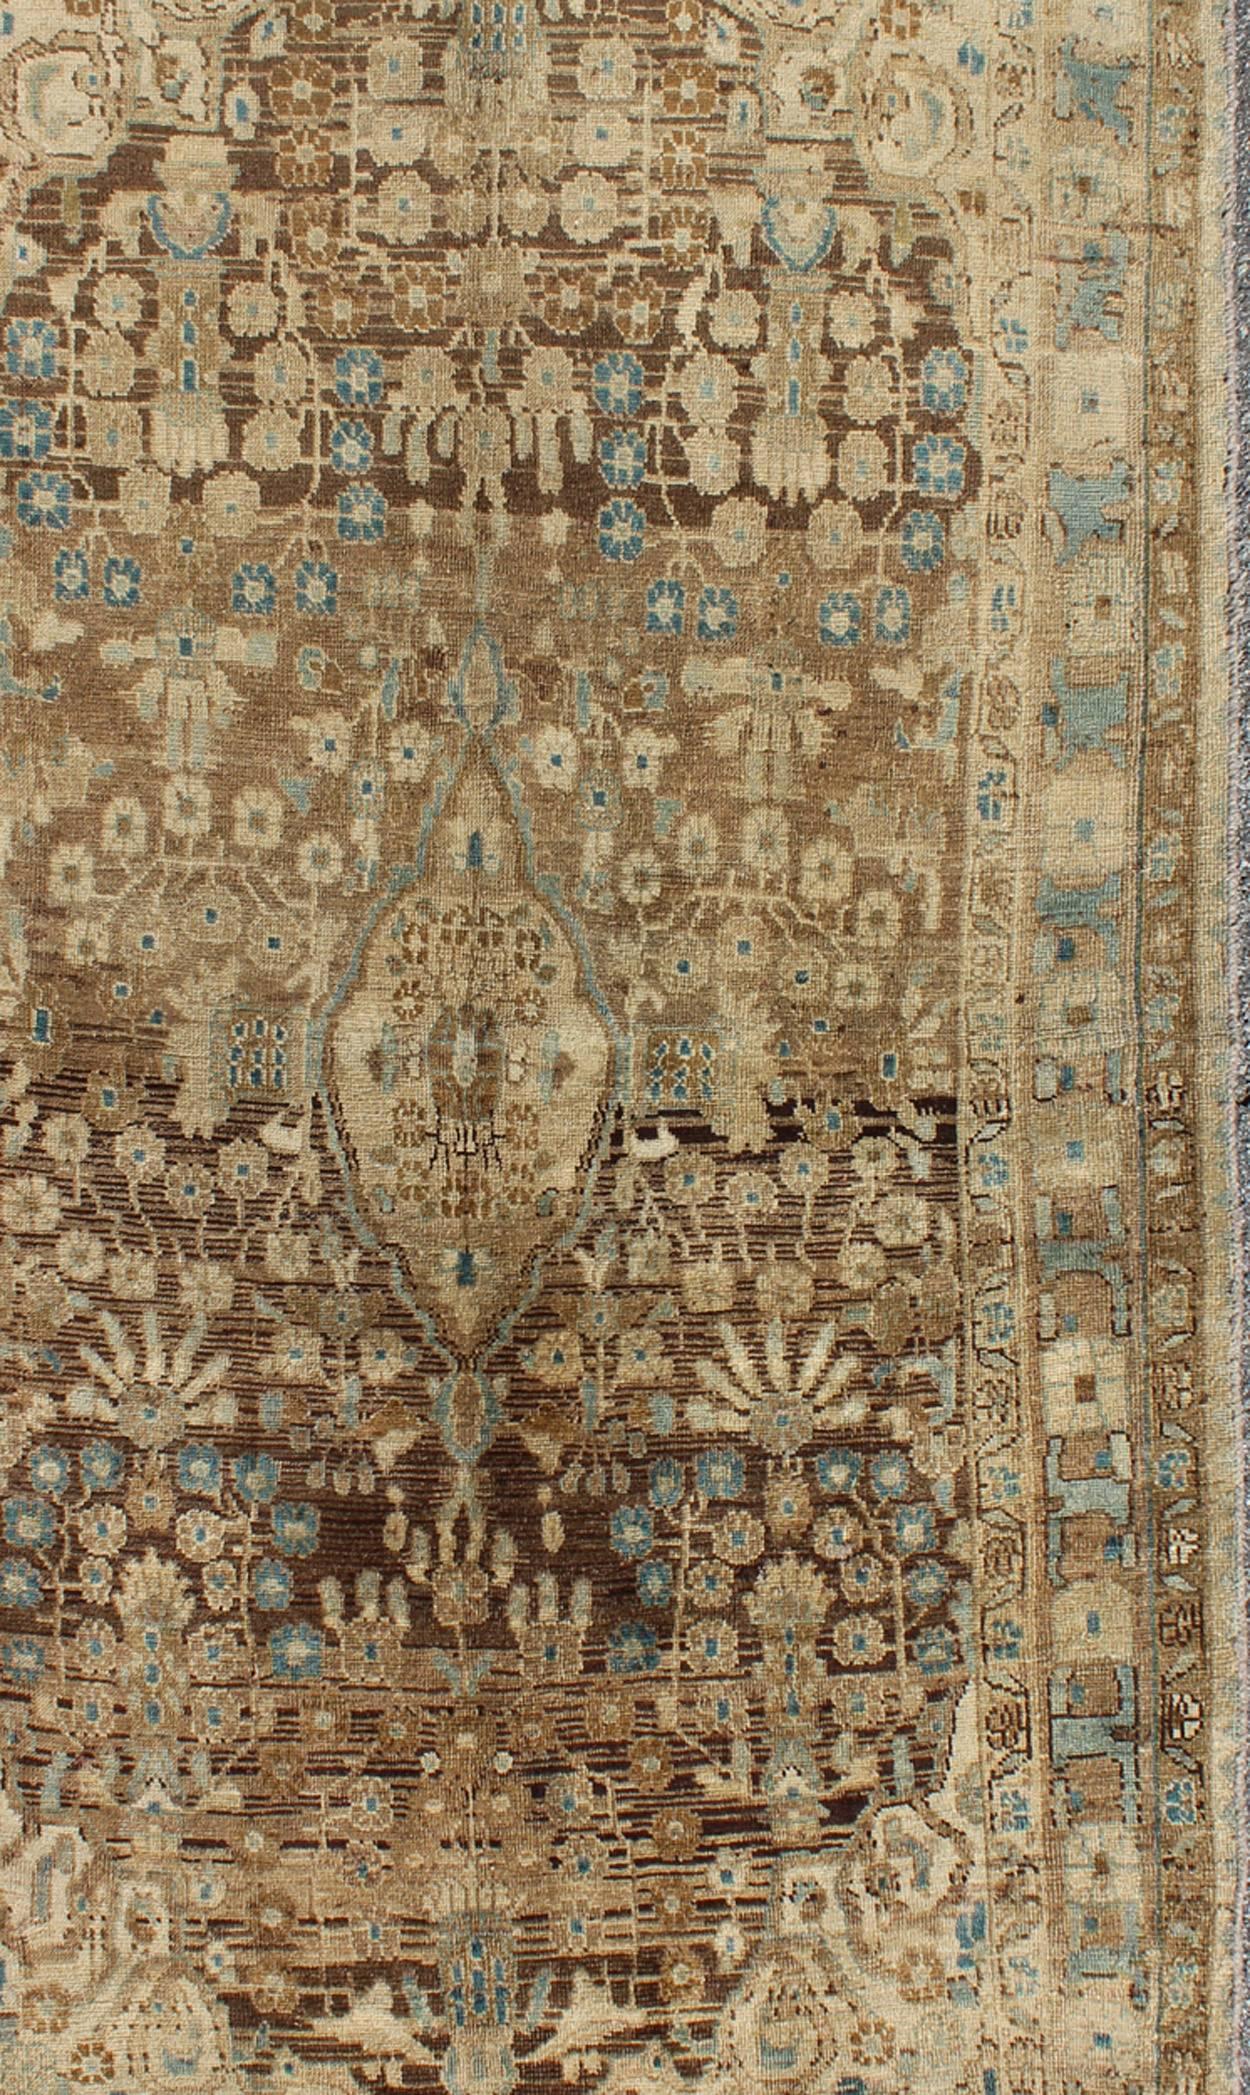 Hand-Woven Persian Mahal Rug with Brown and Blue